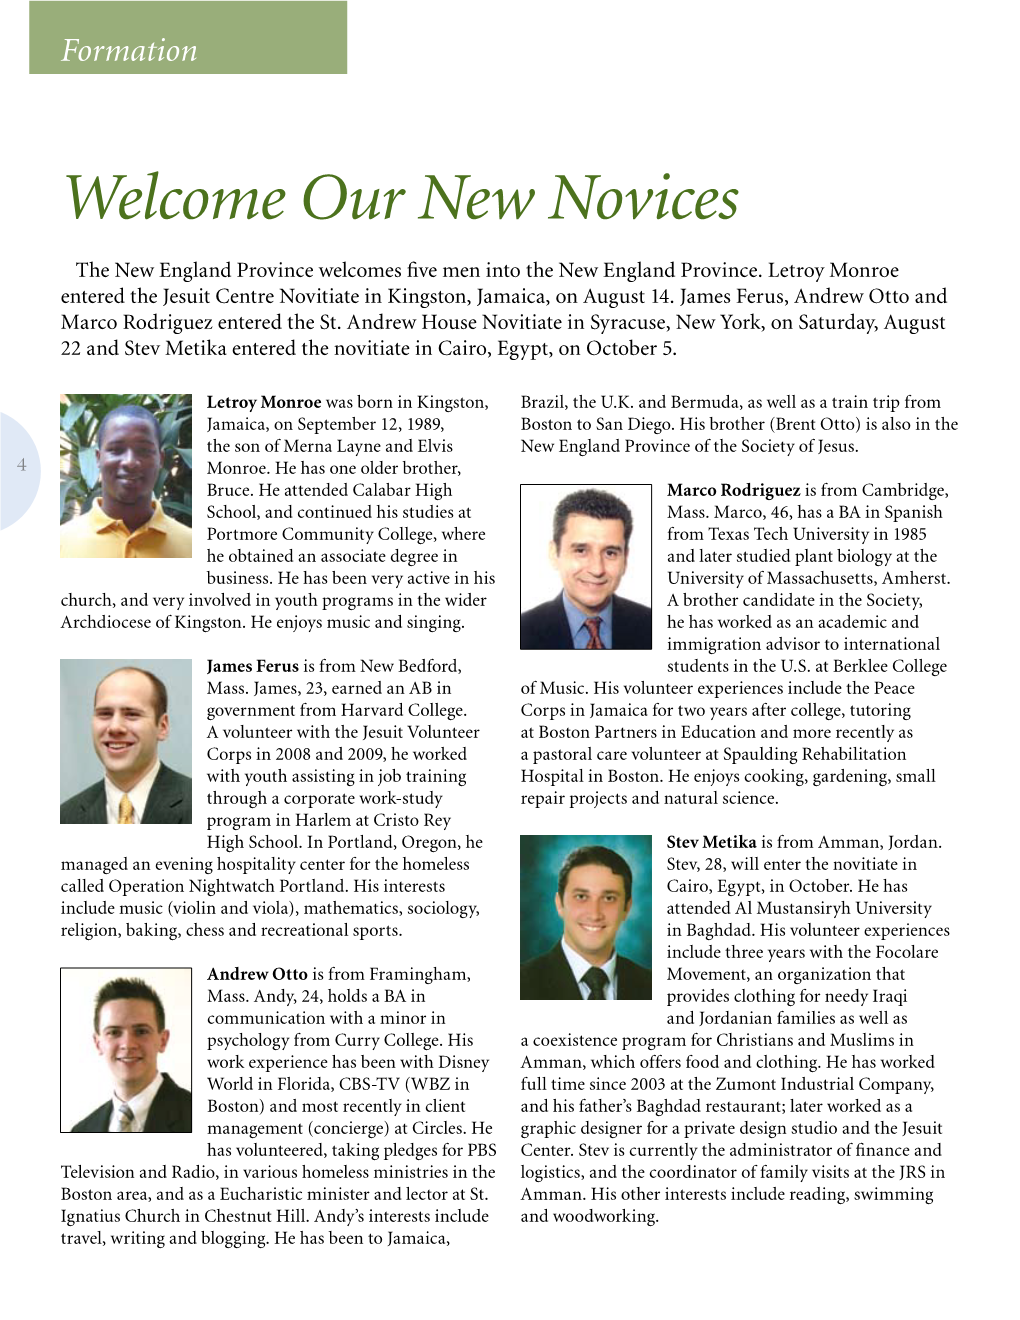 Welcome Our New Novices